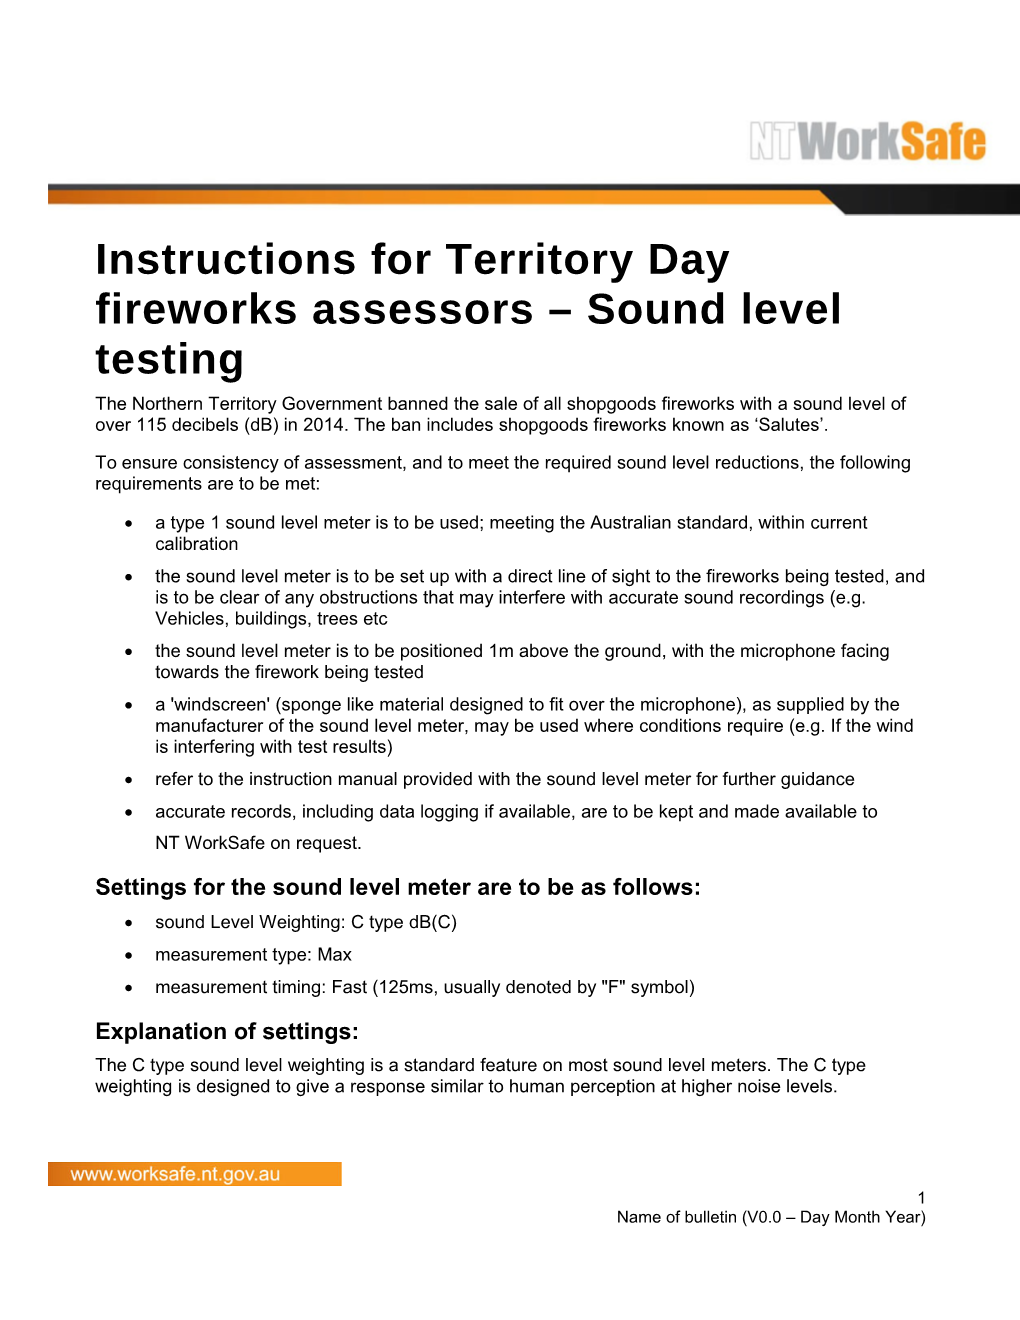 Instructions for Territory Day Fireworks Assessors Sound Level Testing